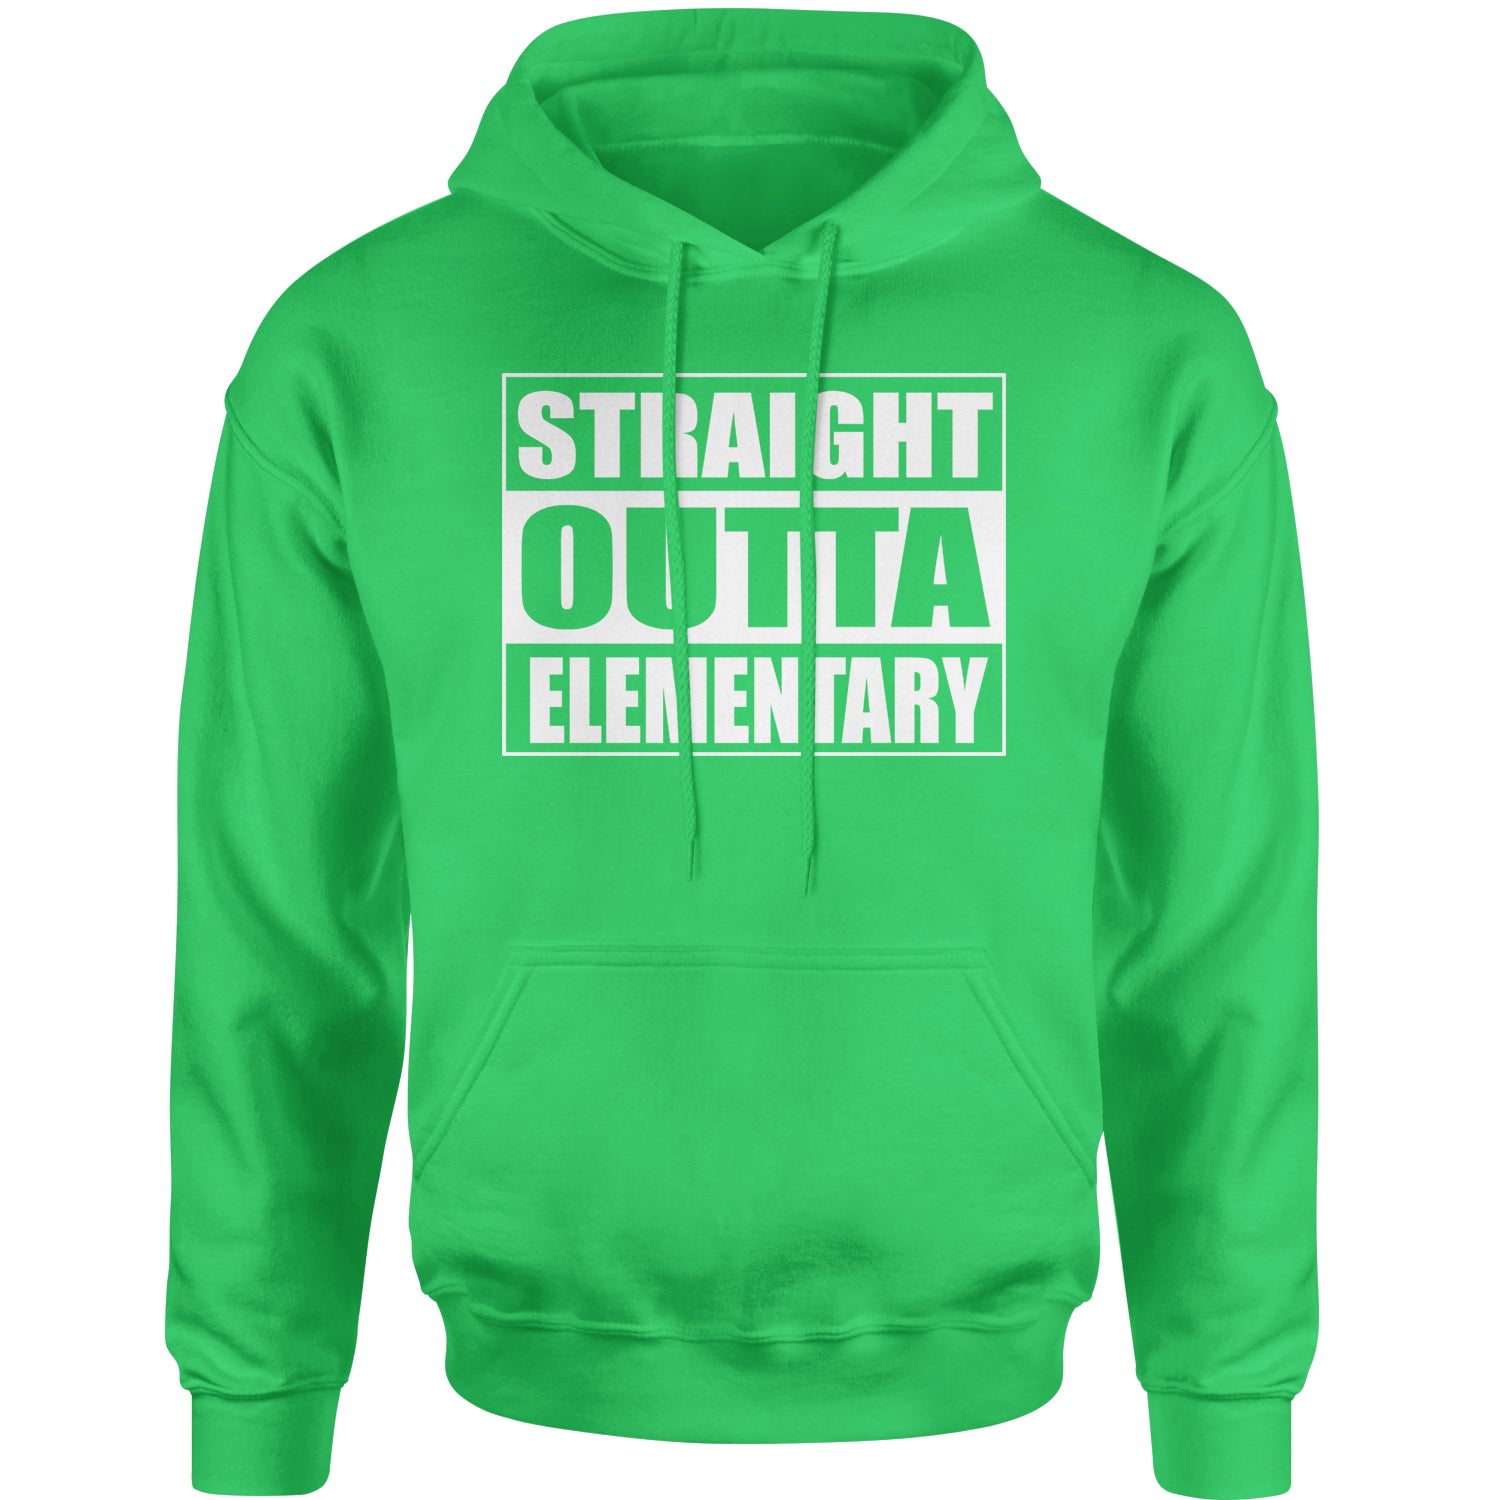 Straight Outta Elementary Adult Hoodie Sweatshirt 2020, 2021, 2022, class, of, quarantine, queen by Expression Tees